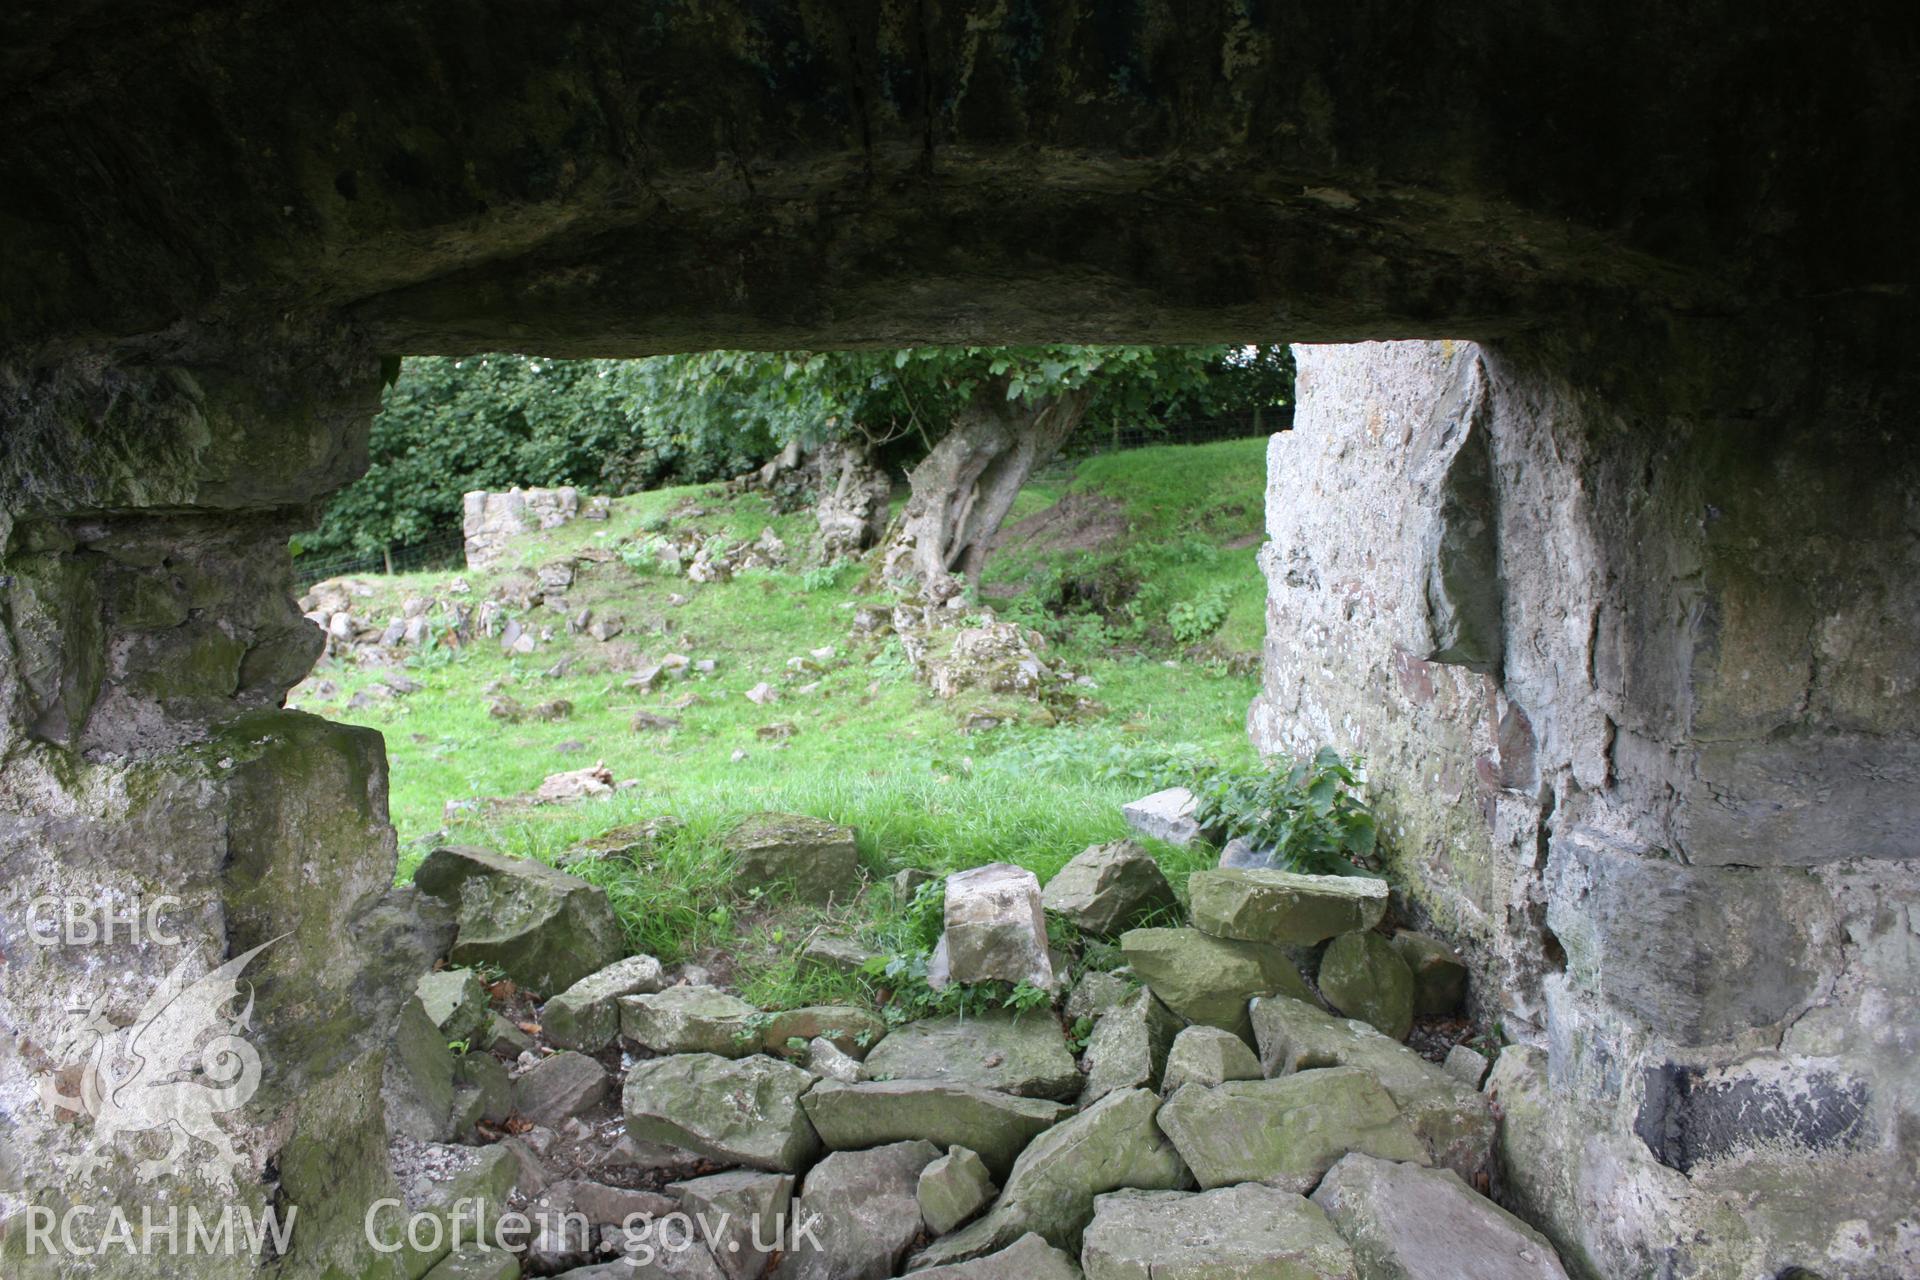 Later entrance through Stewards Tower with large stone jambs and splays to accommodate large door.